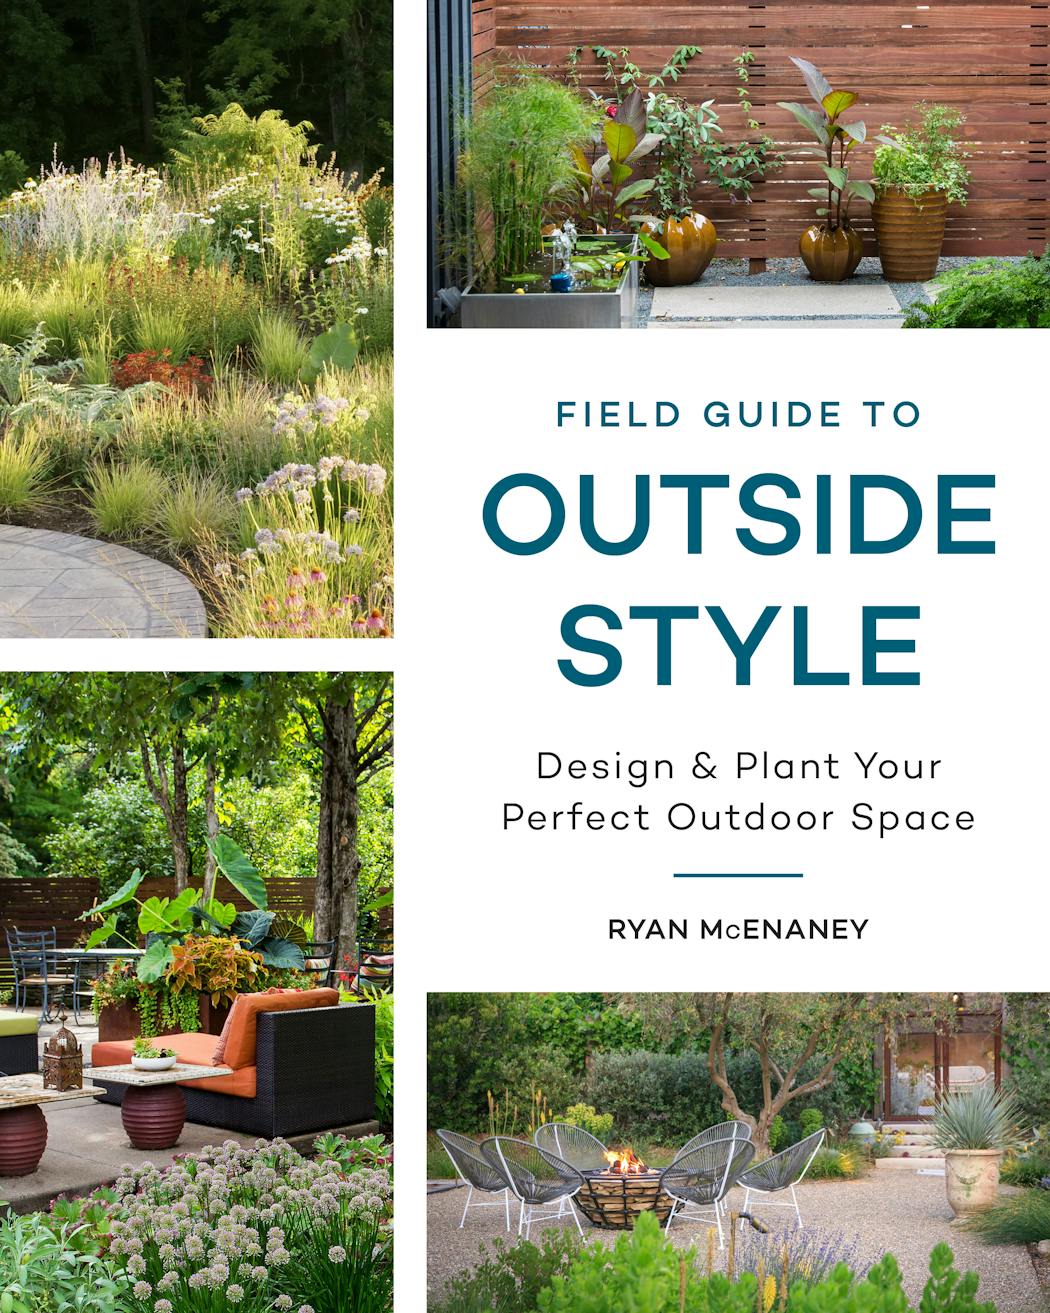 “Field Guide to Outside Style” by Ryan McEnaney.